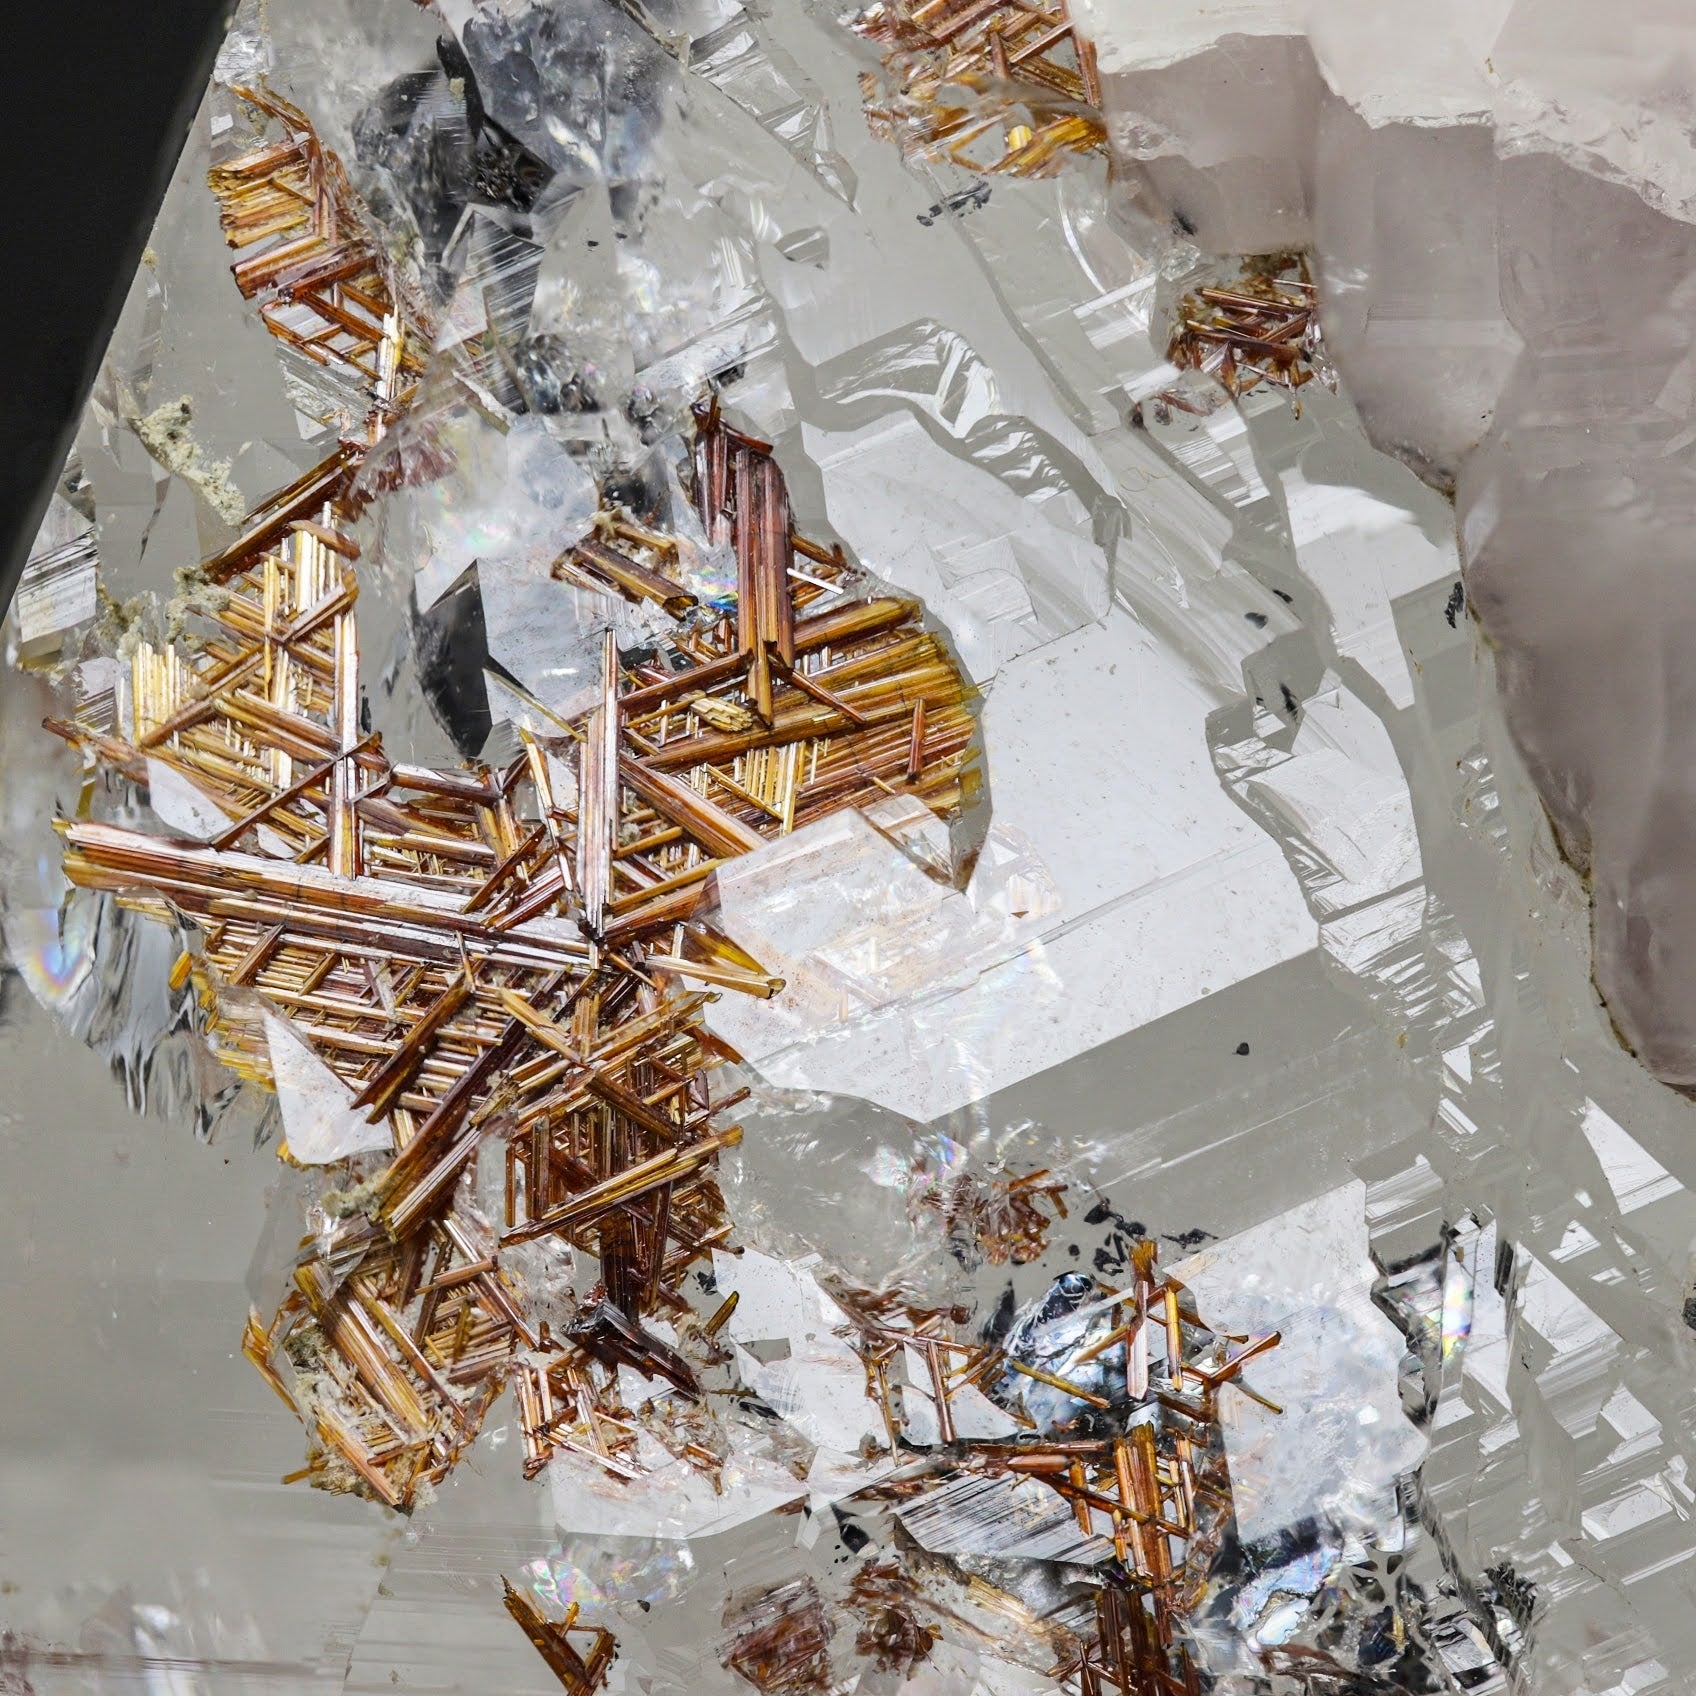 Sagenite Rutile crystals on Quartz with Apatite and Siderite from Pakistan